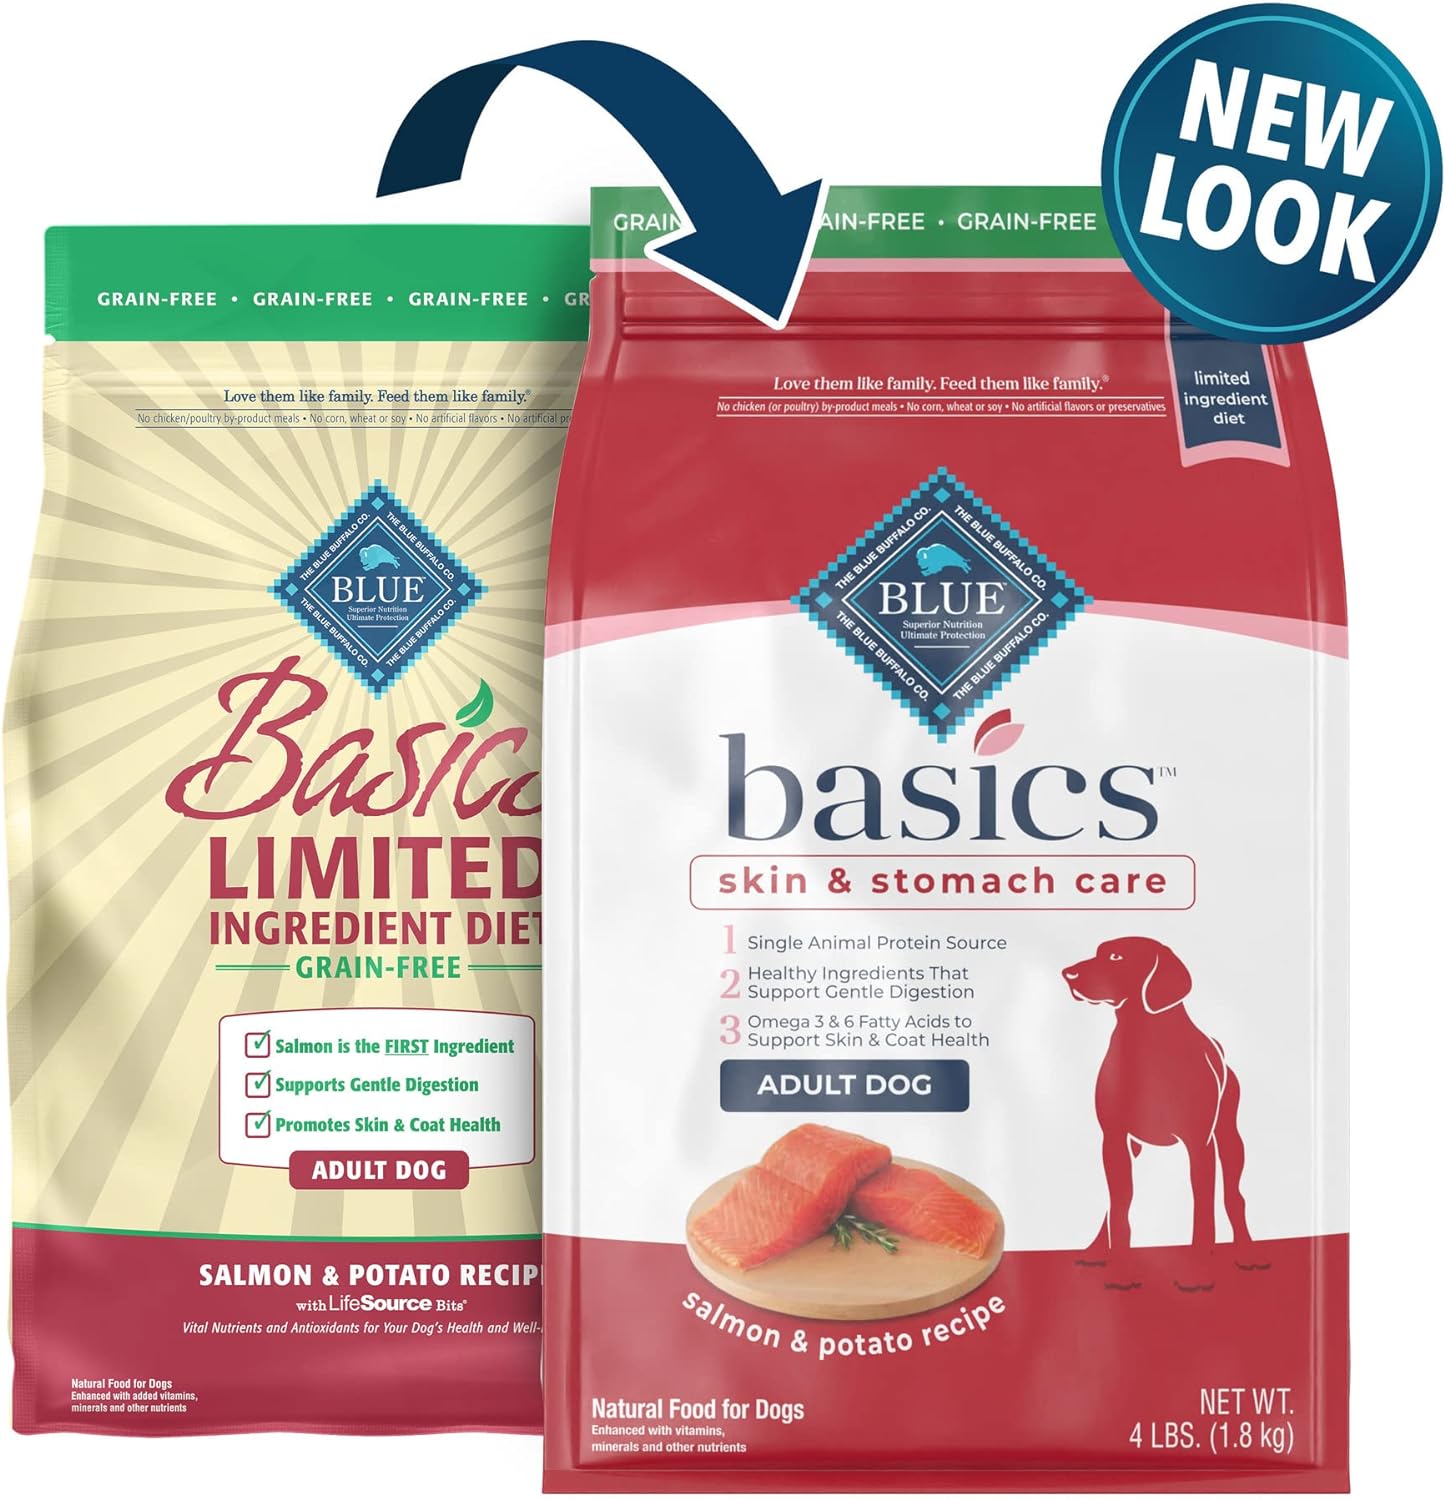 Blue Basics Limited Ingredient Diet Adult Grain-Free Salmon and Potato Recipe Dry Dog Food – Gallery Image 2